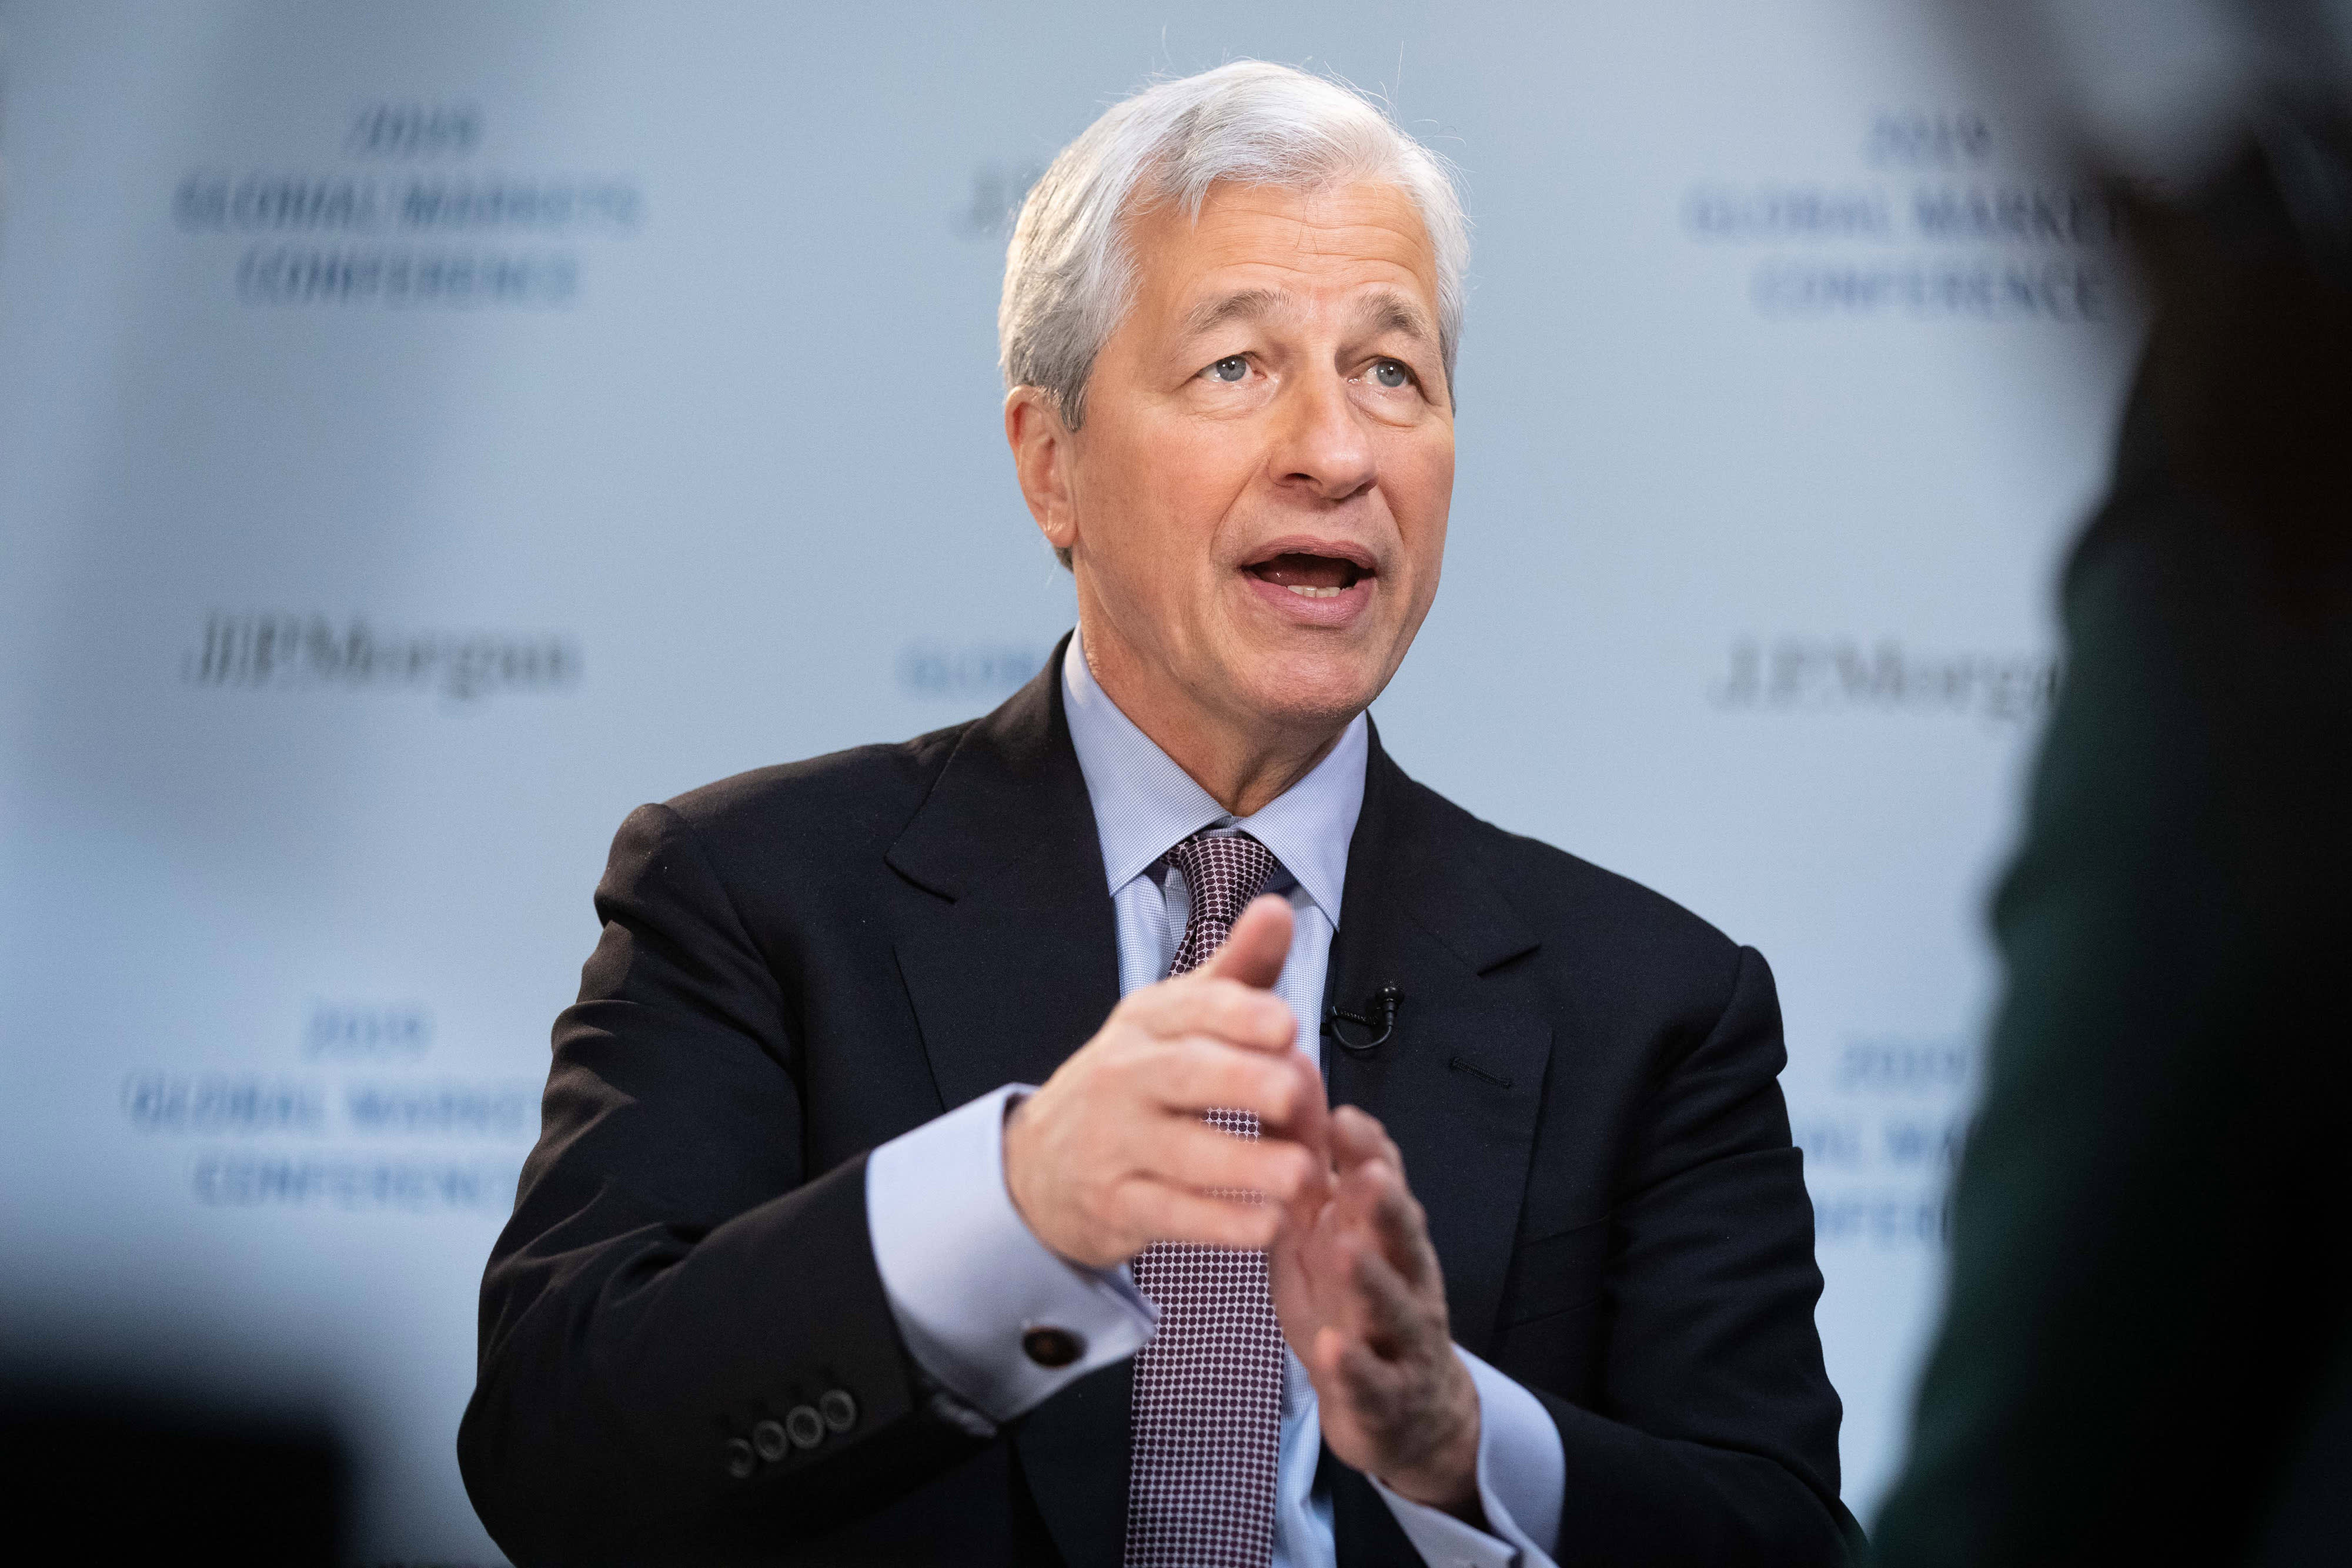 Jamie Dimon says US consumers are “wrapped up, ready to go” with an extra $ 2 trillion in checking accounts